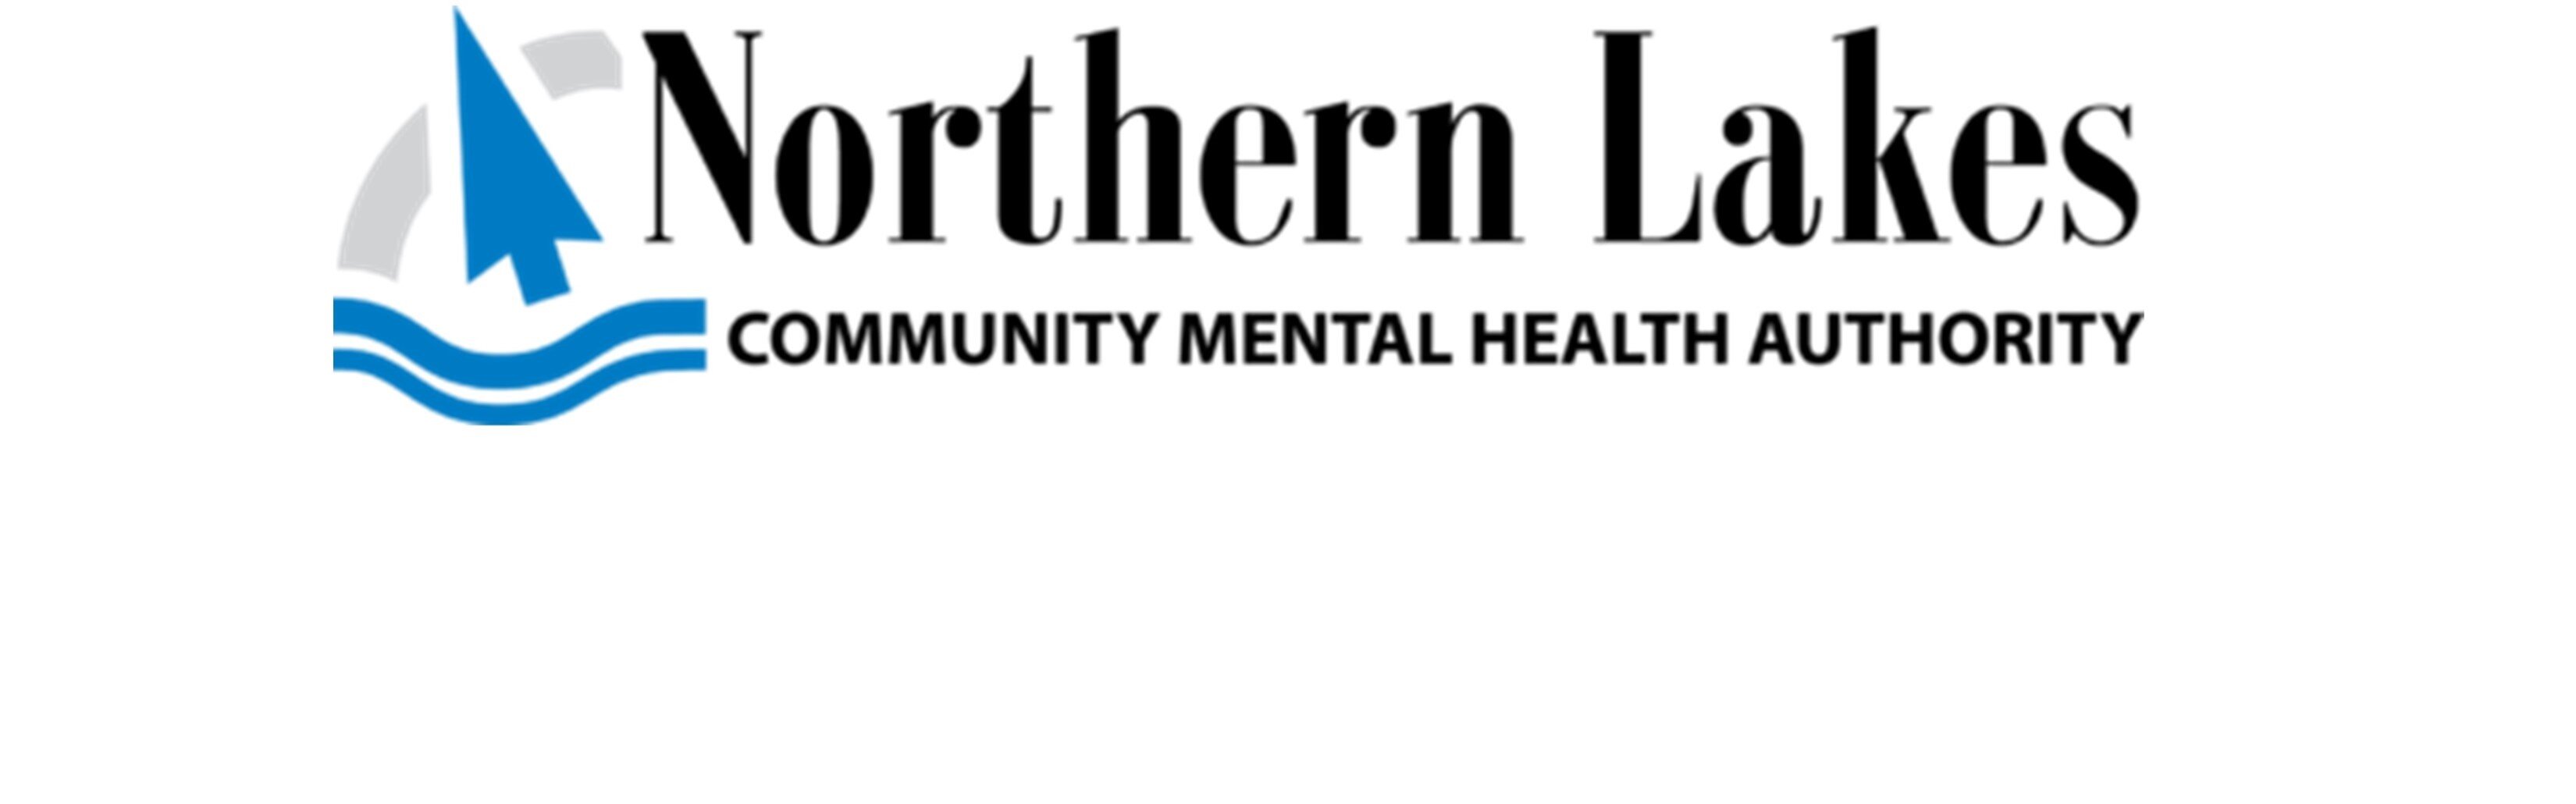 www.northernlakescmh.org